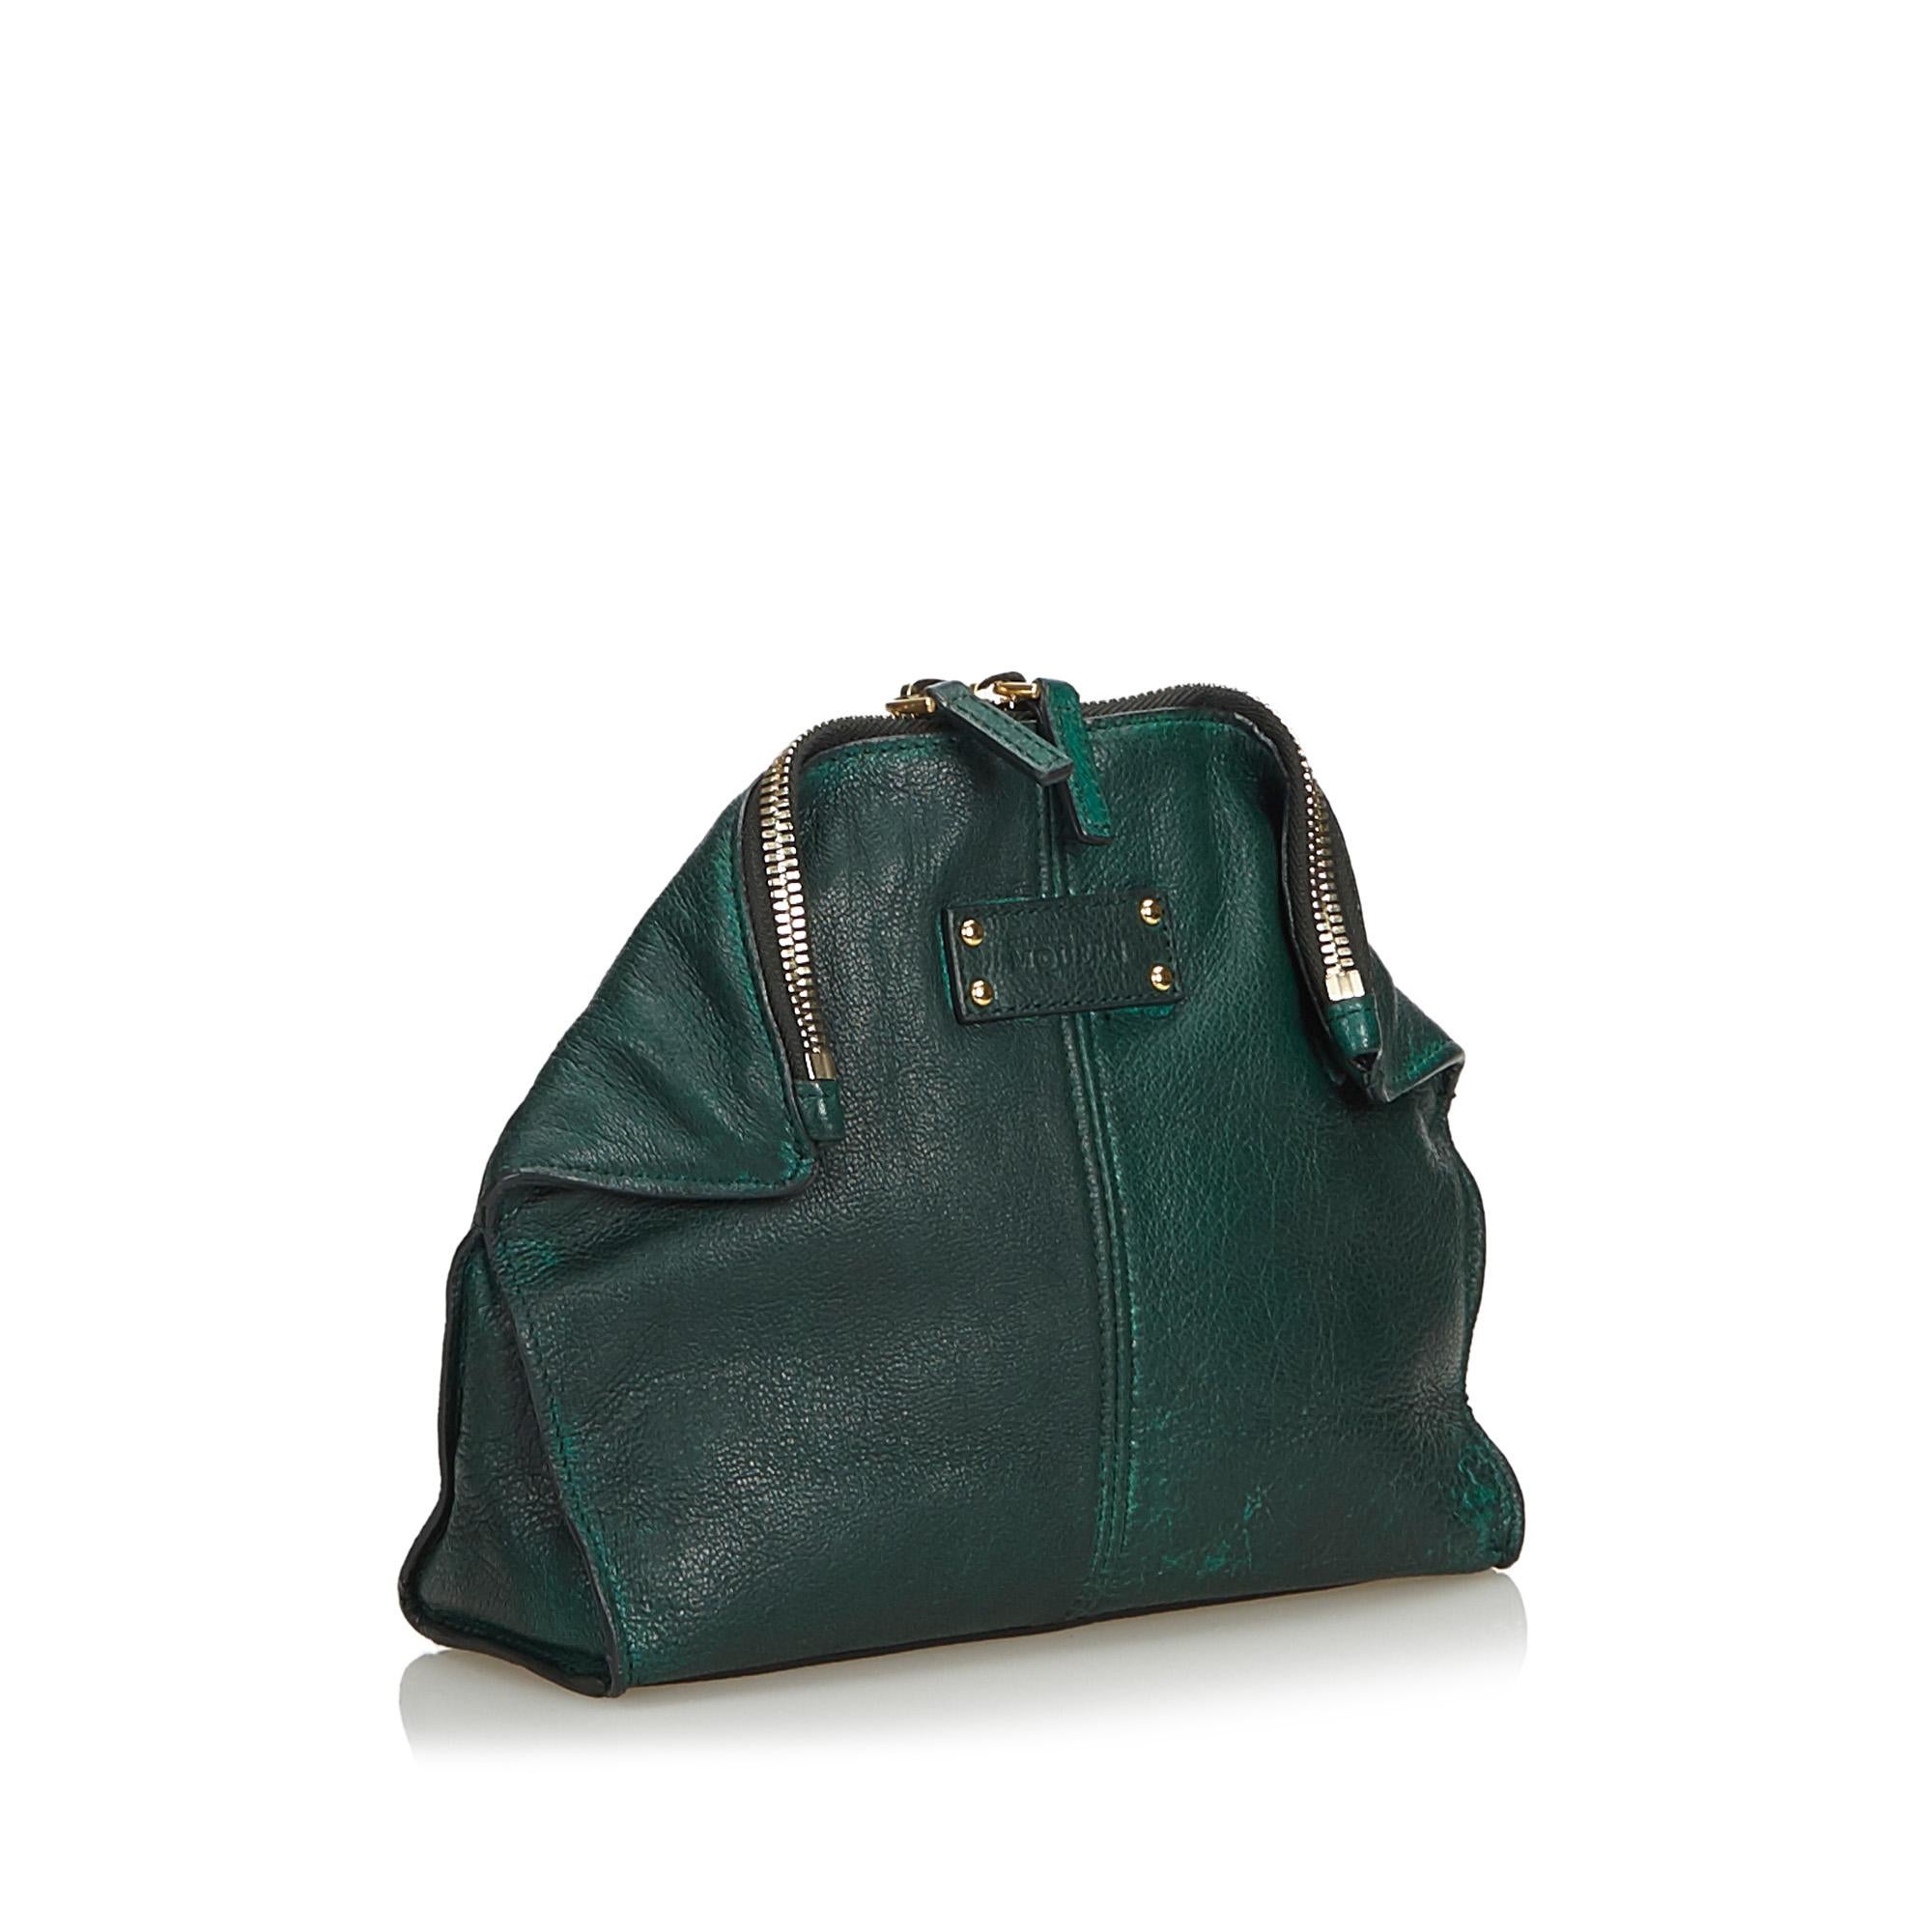 The De Manta Union clutch features a leather body, a two way top zip closure, and snap-over front corners. It carries as B+ condition rating.

Inclusions: 
This item does not come with inclusions.

Dimensions:
Length: 18.00 cm
Width: 20.50 cm
Depth: